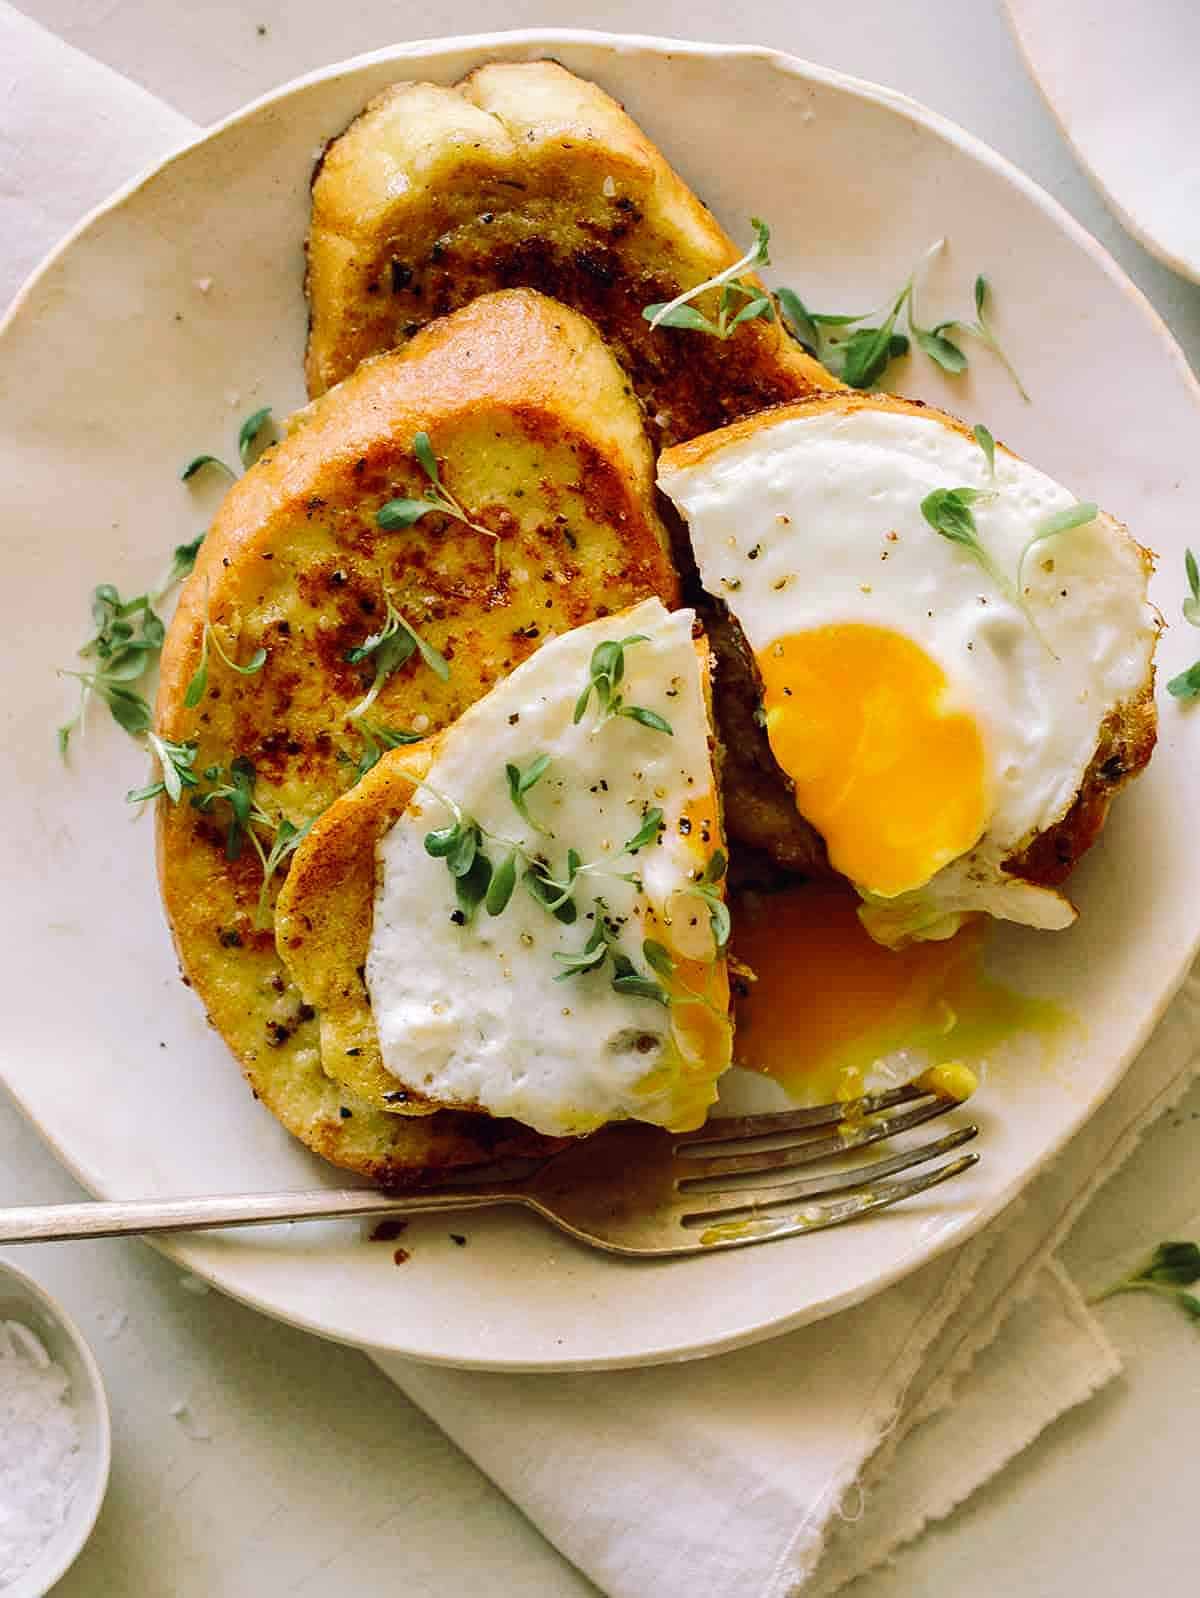 The Tastiest French Toast Recipe Ever! - Deliciously Plated